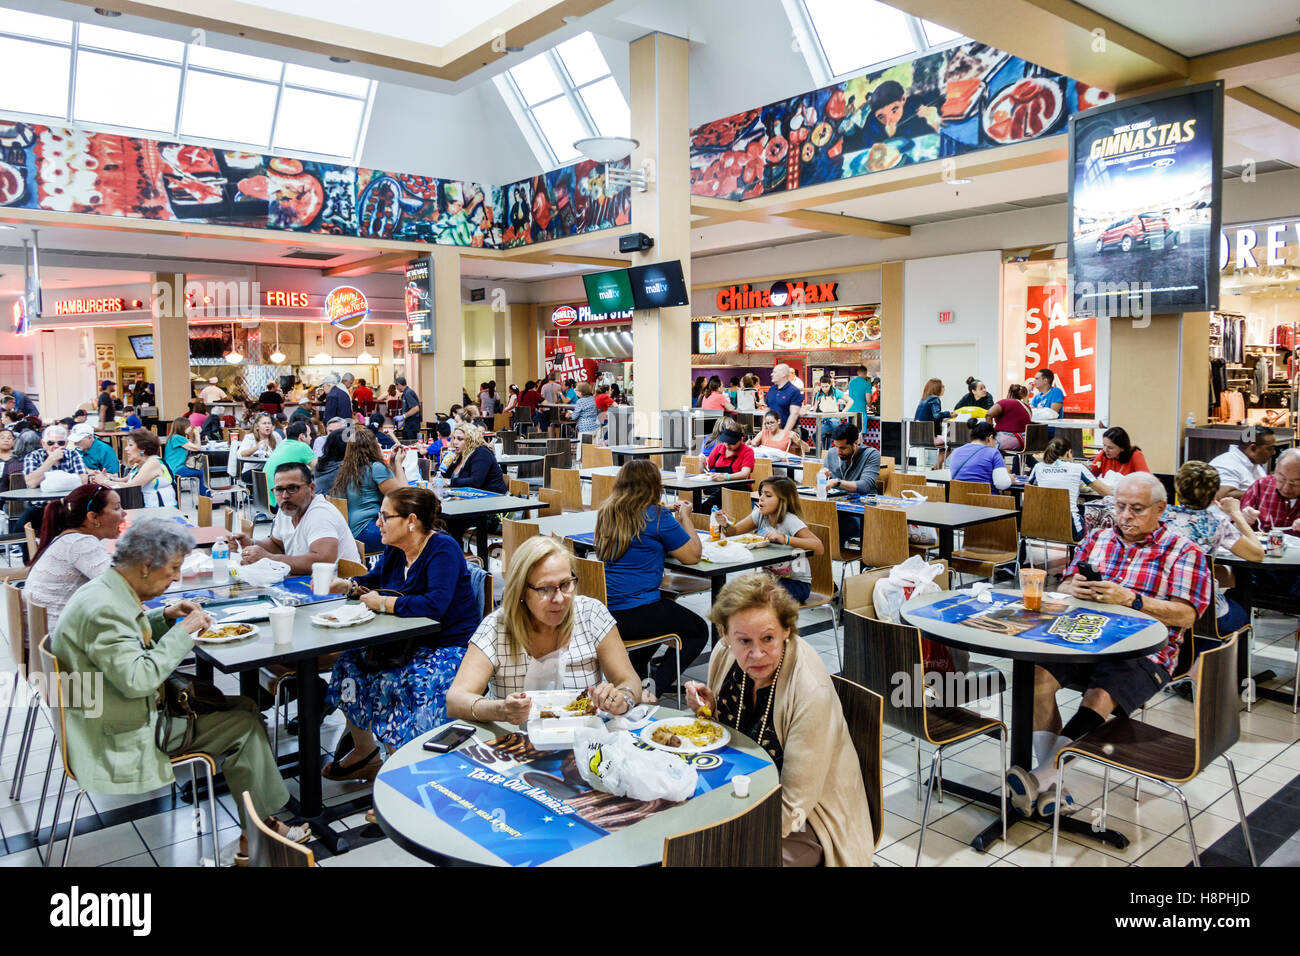 Miami Florida,International mall,food court plaza,tables,restaurant restaurants food dining cafe cafes,concessions,FL161025211 Stock Photo